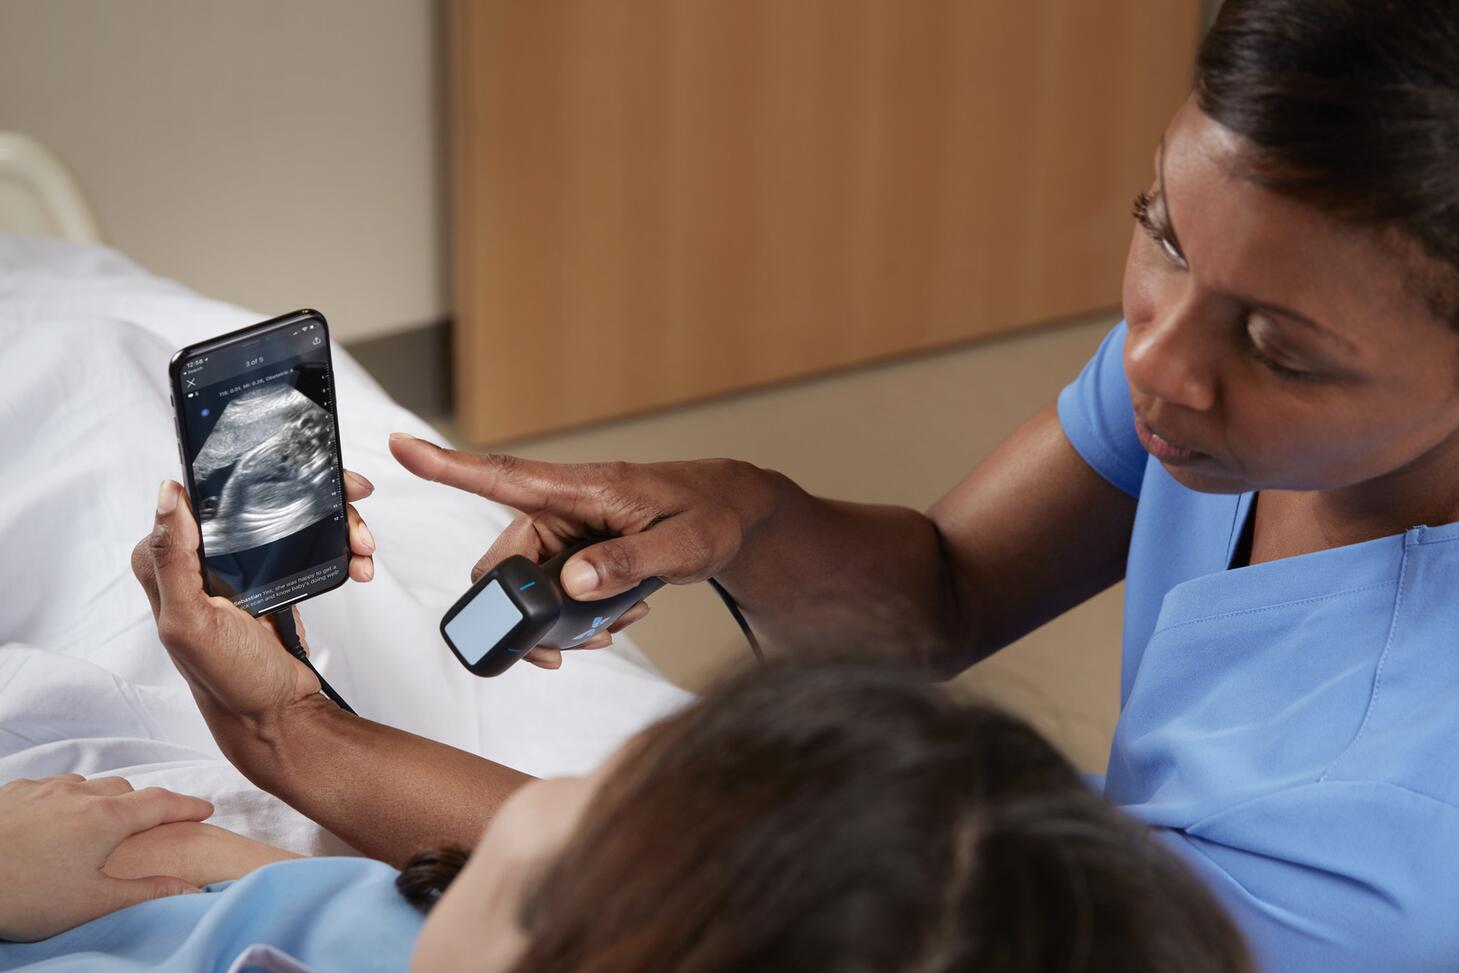 A healthcare working showing a woman a sonogram image on a cellphone.